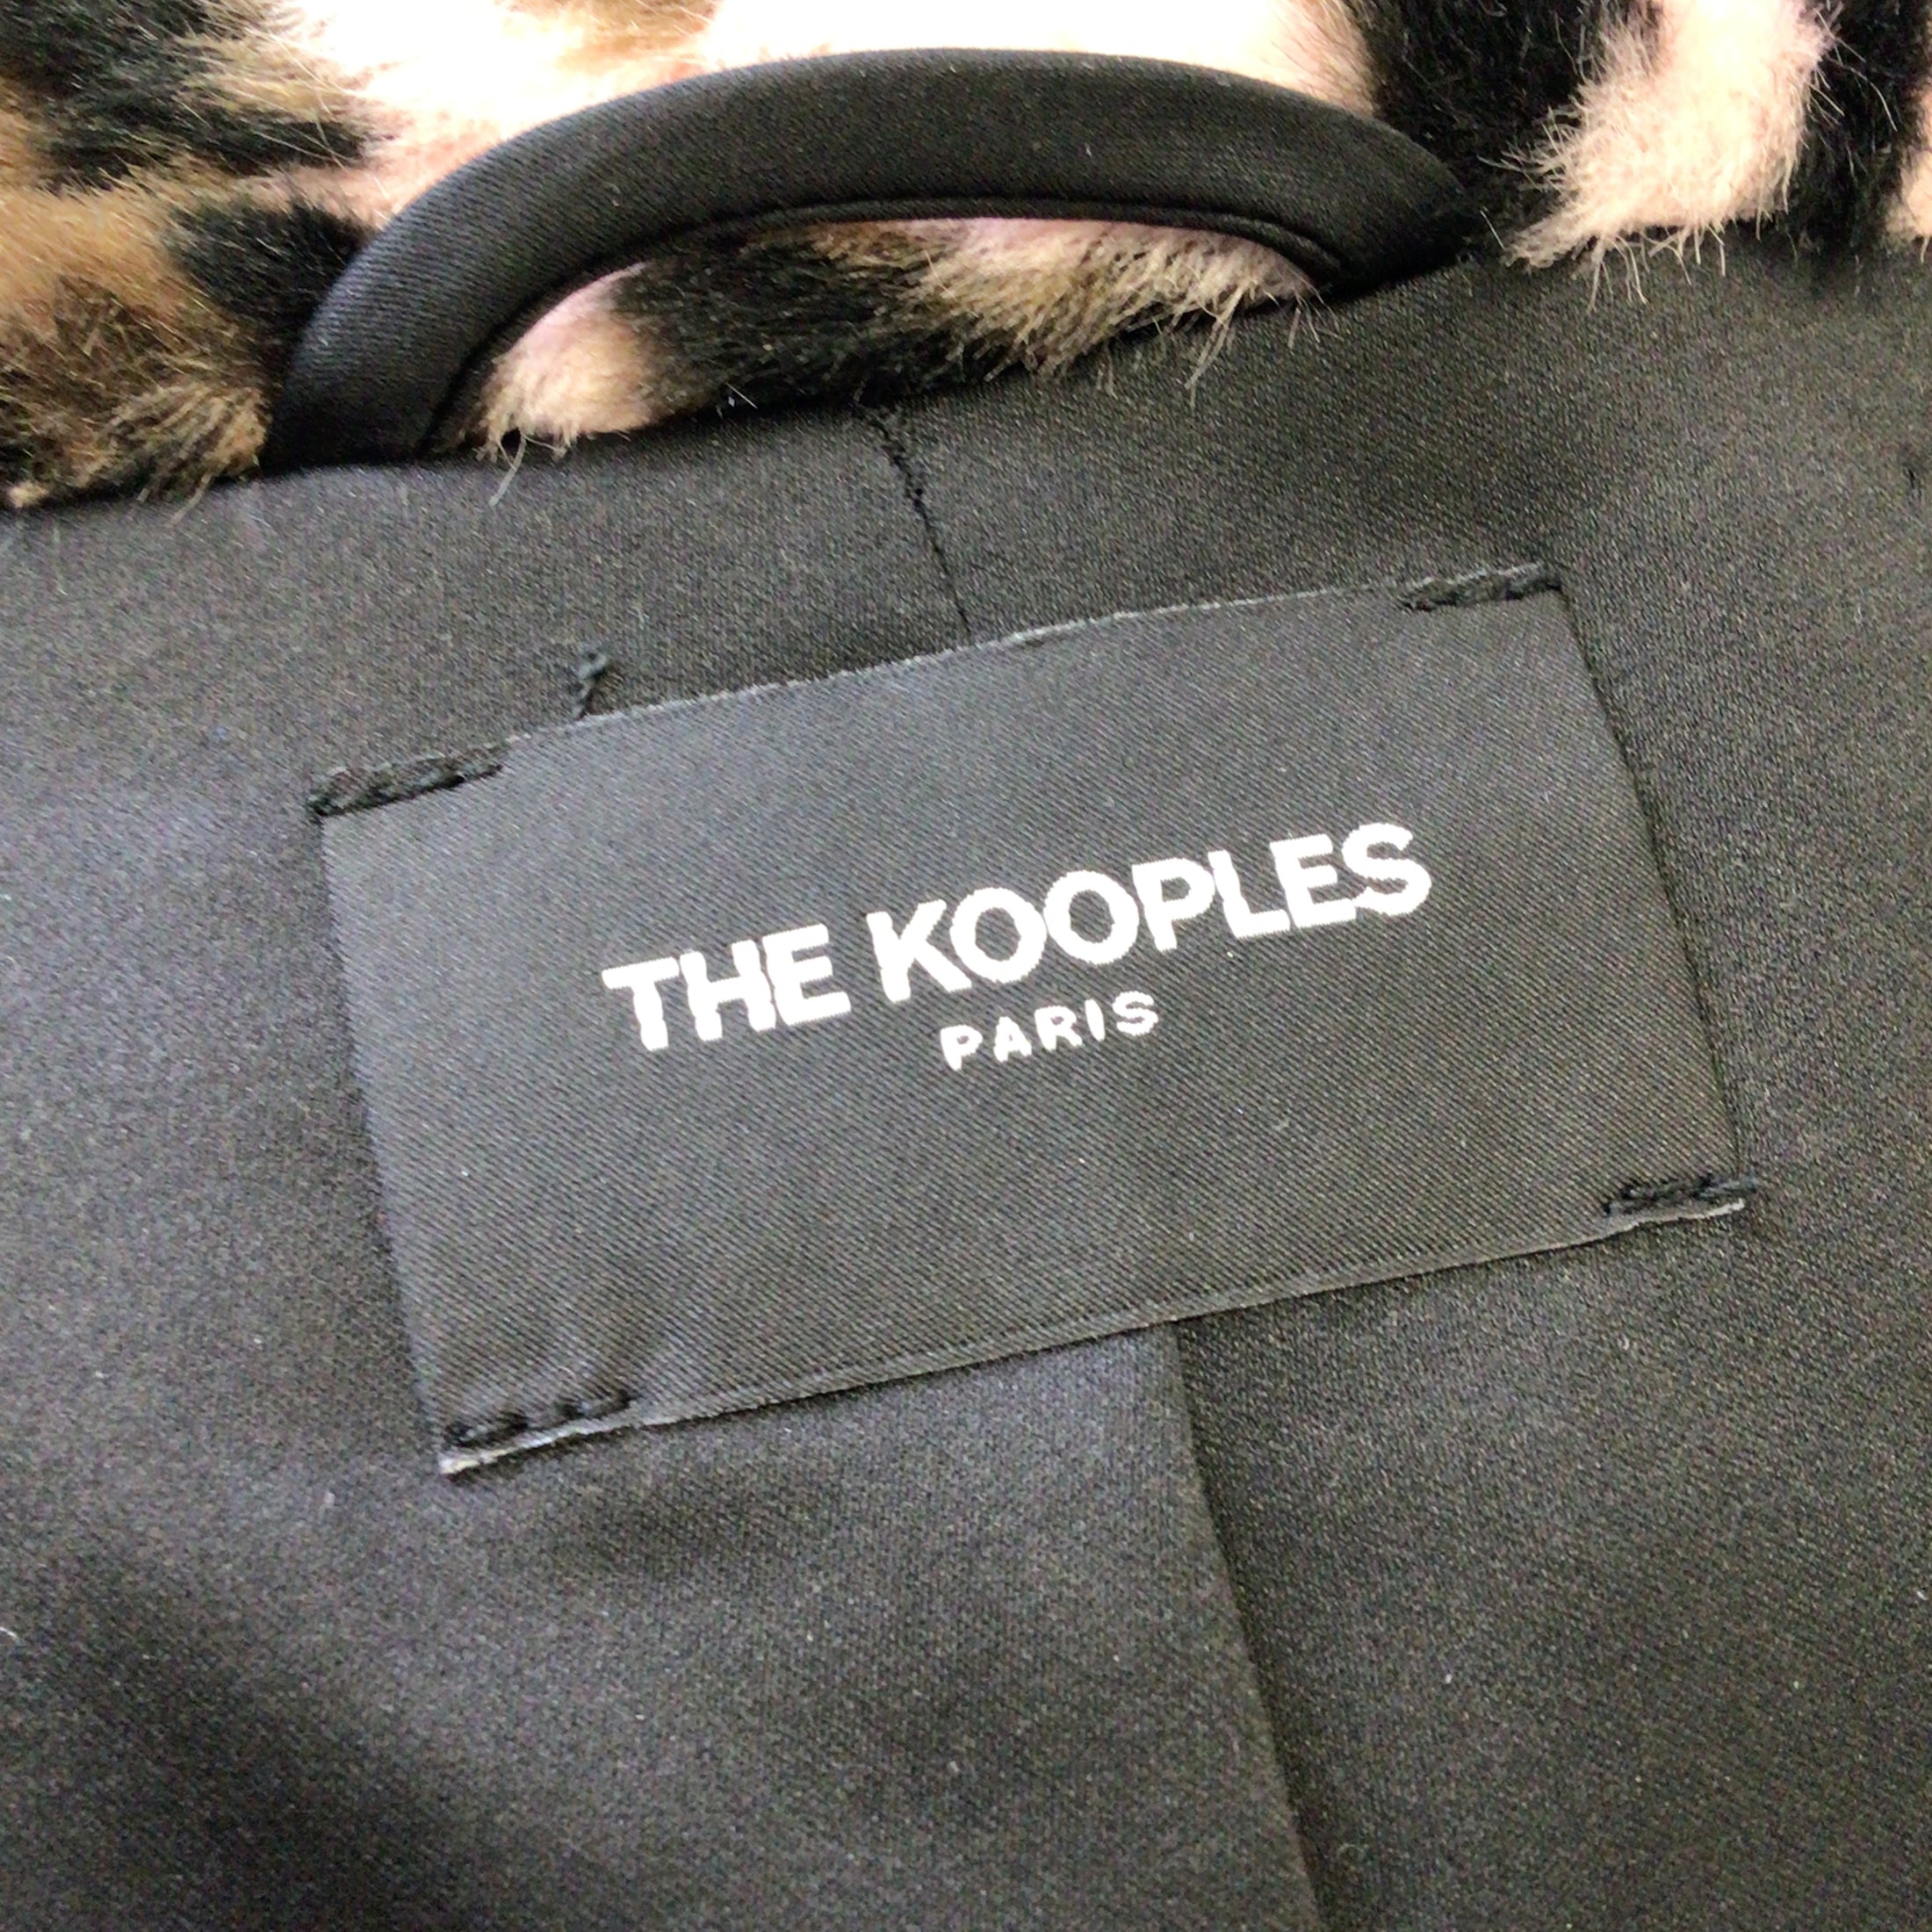 The Kooples Pink / Brown / Black Double Breasted Leopard Printed Faux Fur Coat